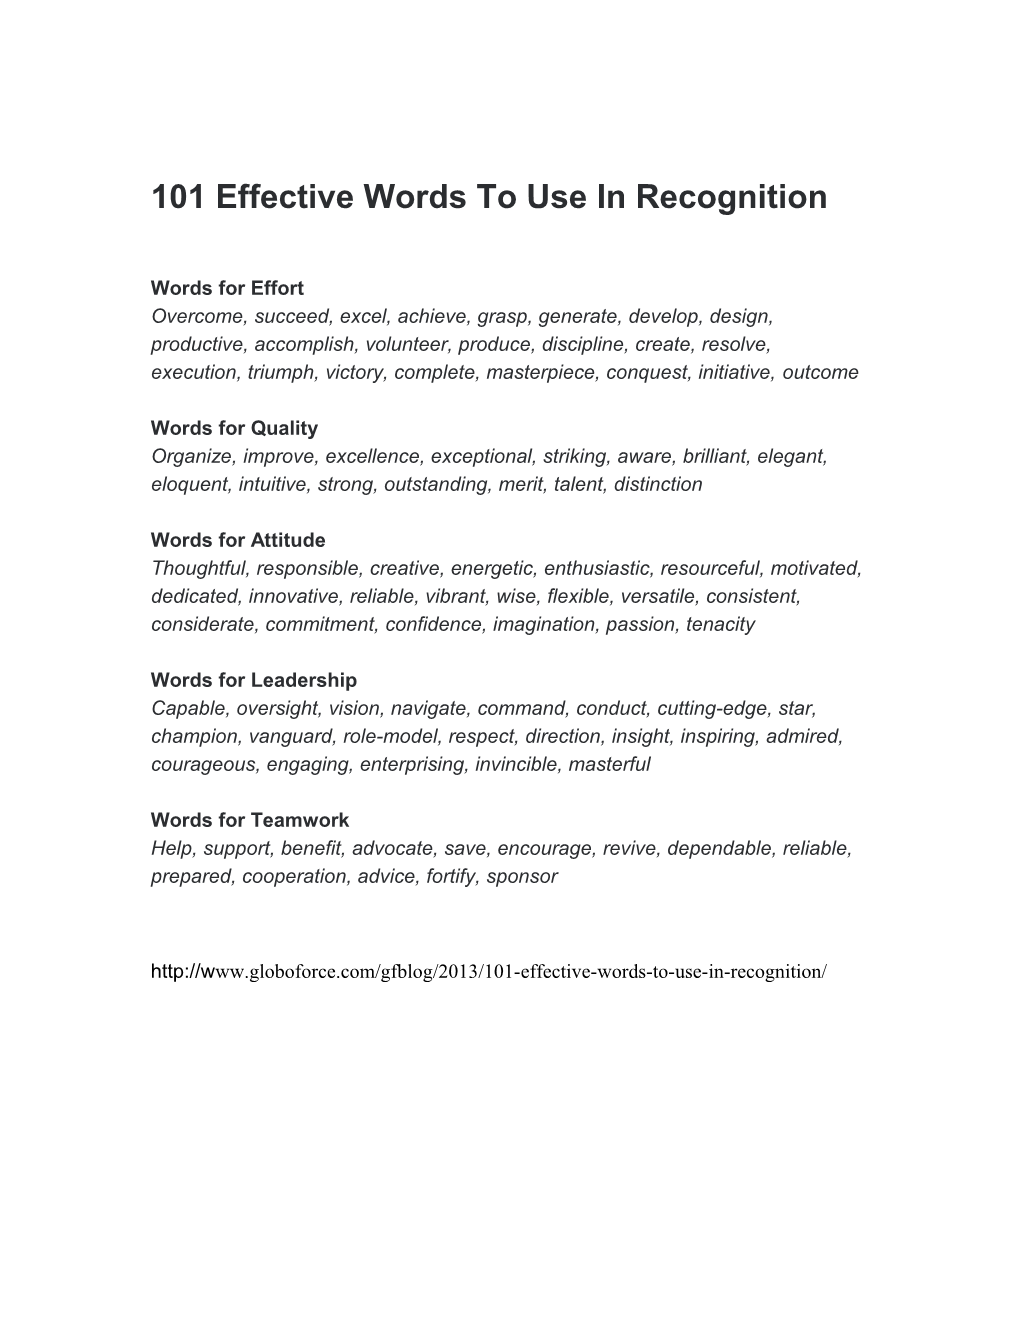 101 Effective Words to Use in Recognition